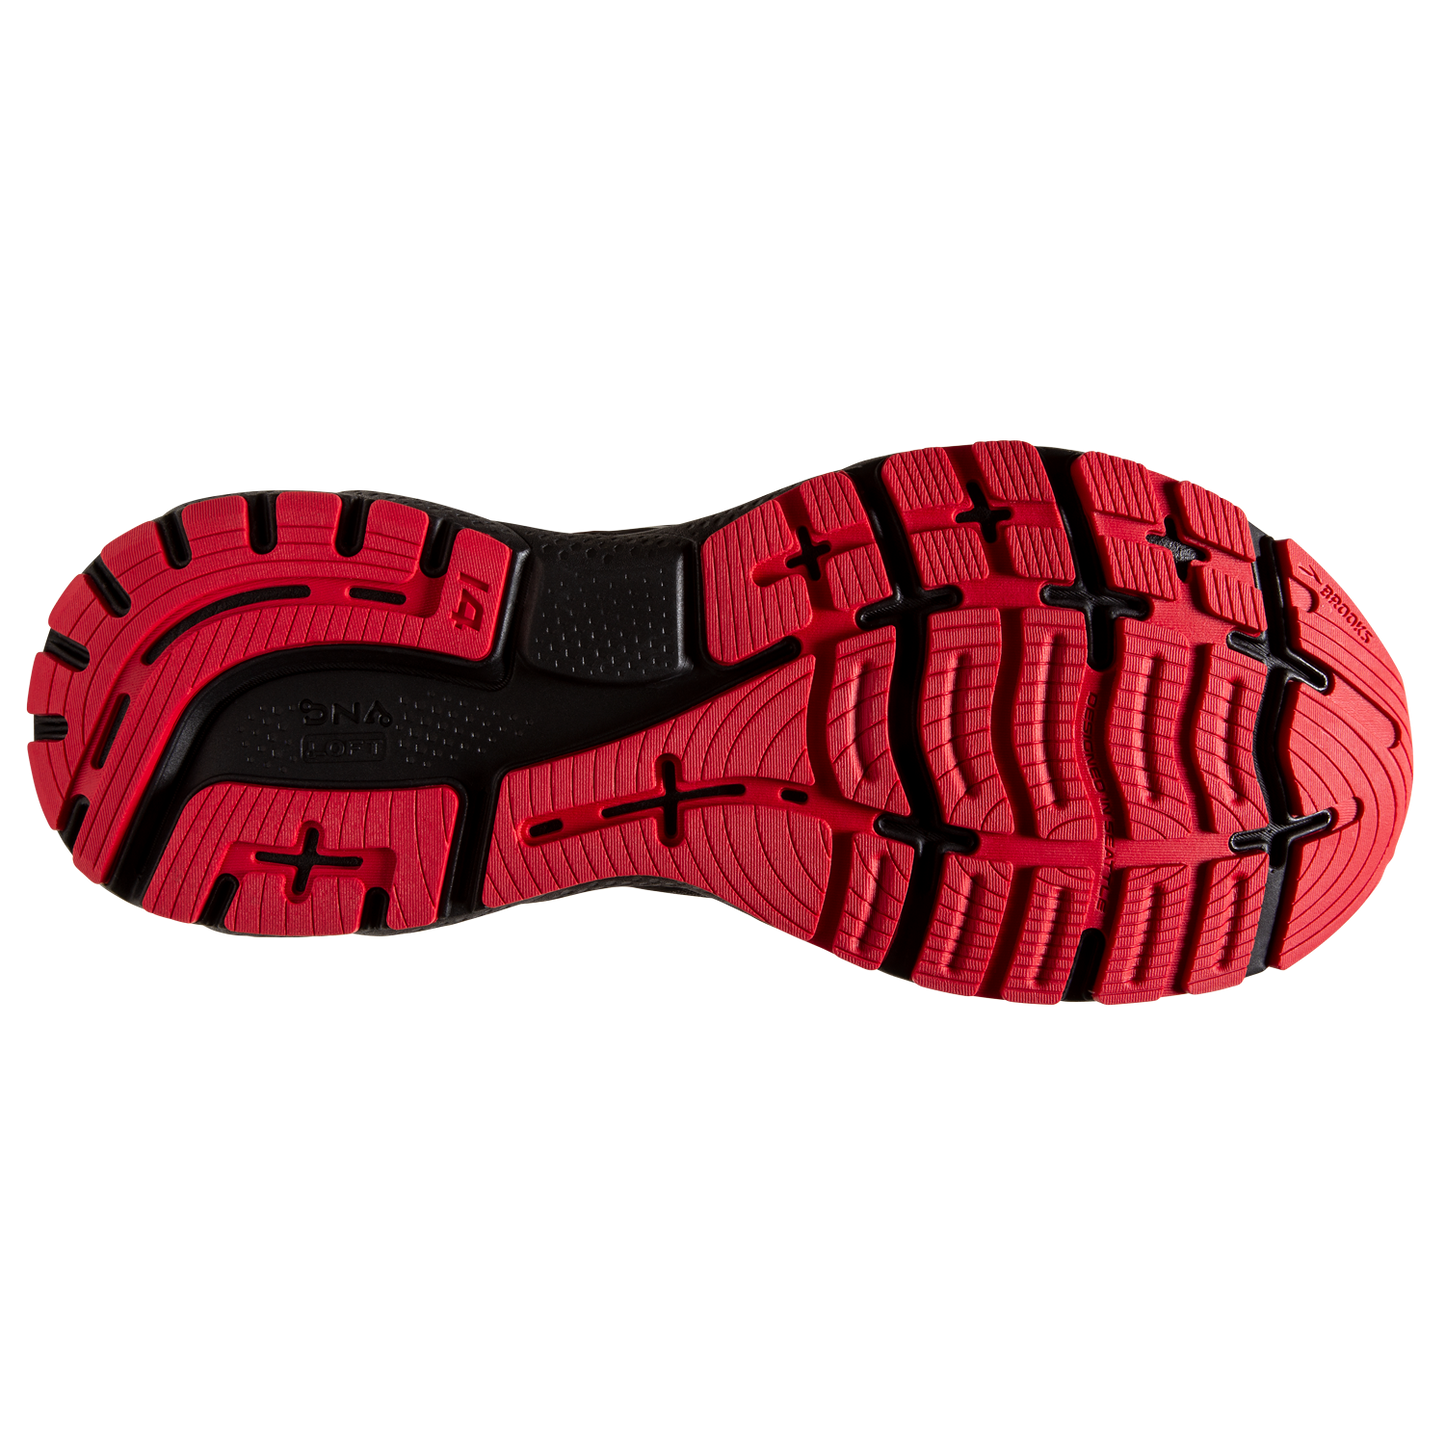 Ghost 14 GTX::Black/Blackened Pearl/High Risk Red